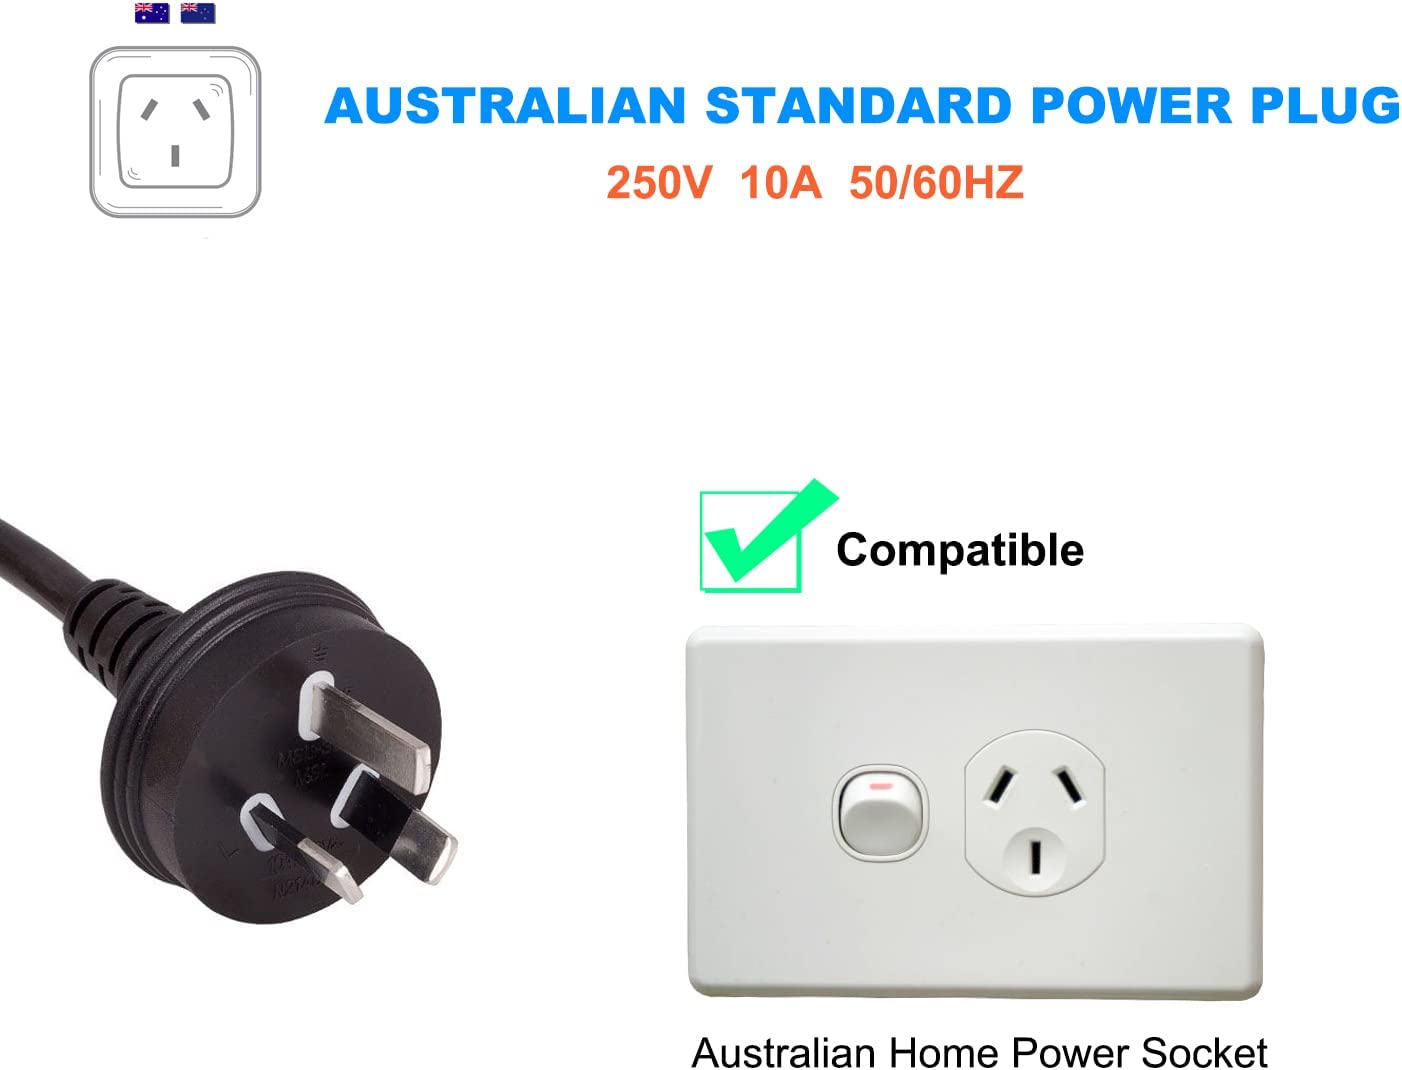 Type 1 EV Charger with Australian plug, 5m Cable, 6/8/10a Adjustable, Portable  EVSE Charger for electric vehicles